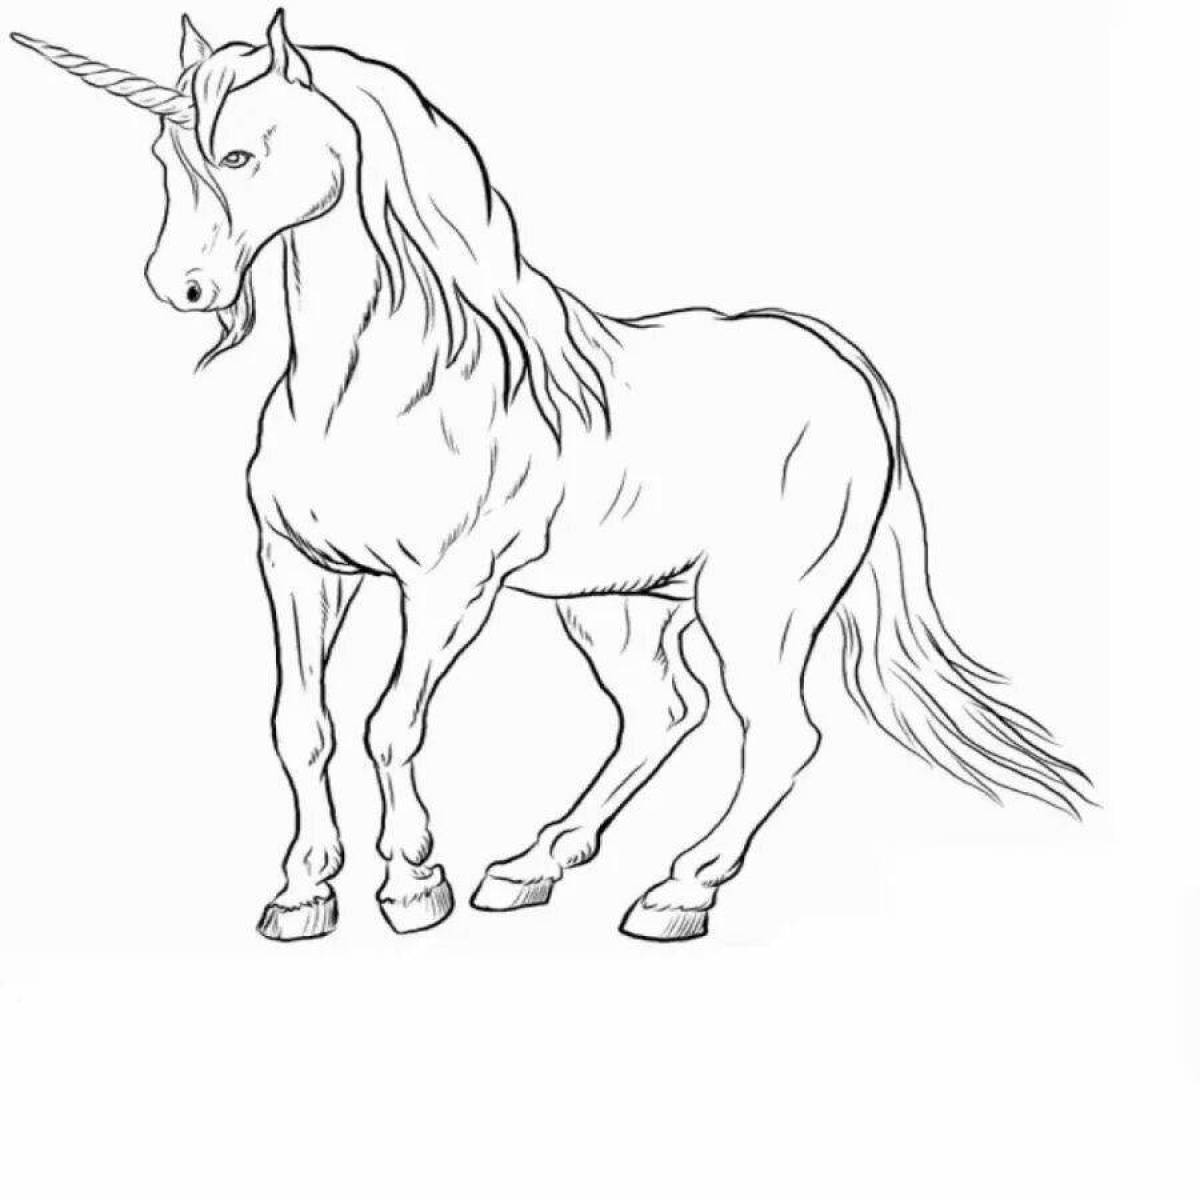 Generous coloring how to draw a unicorn